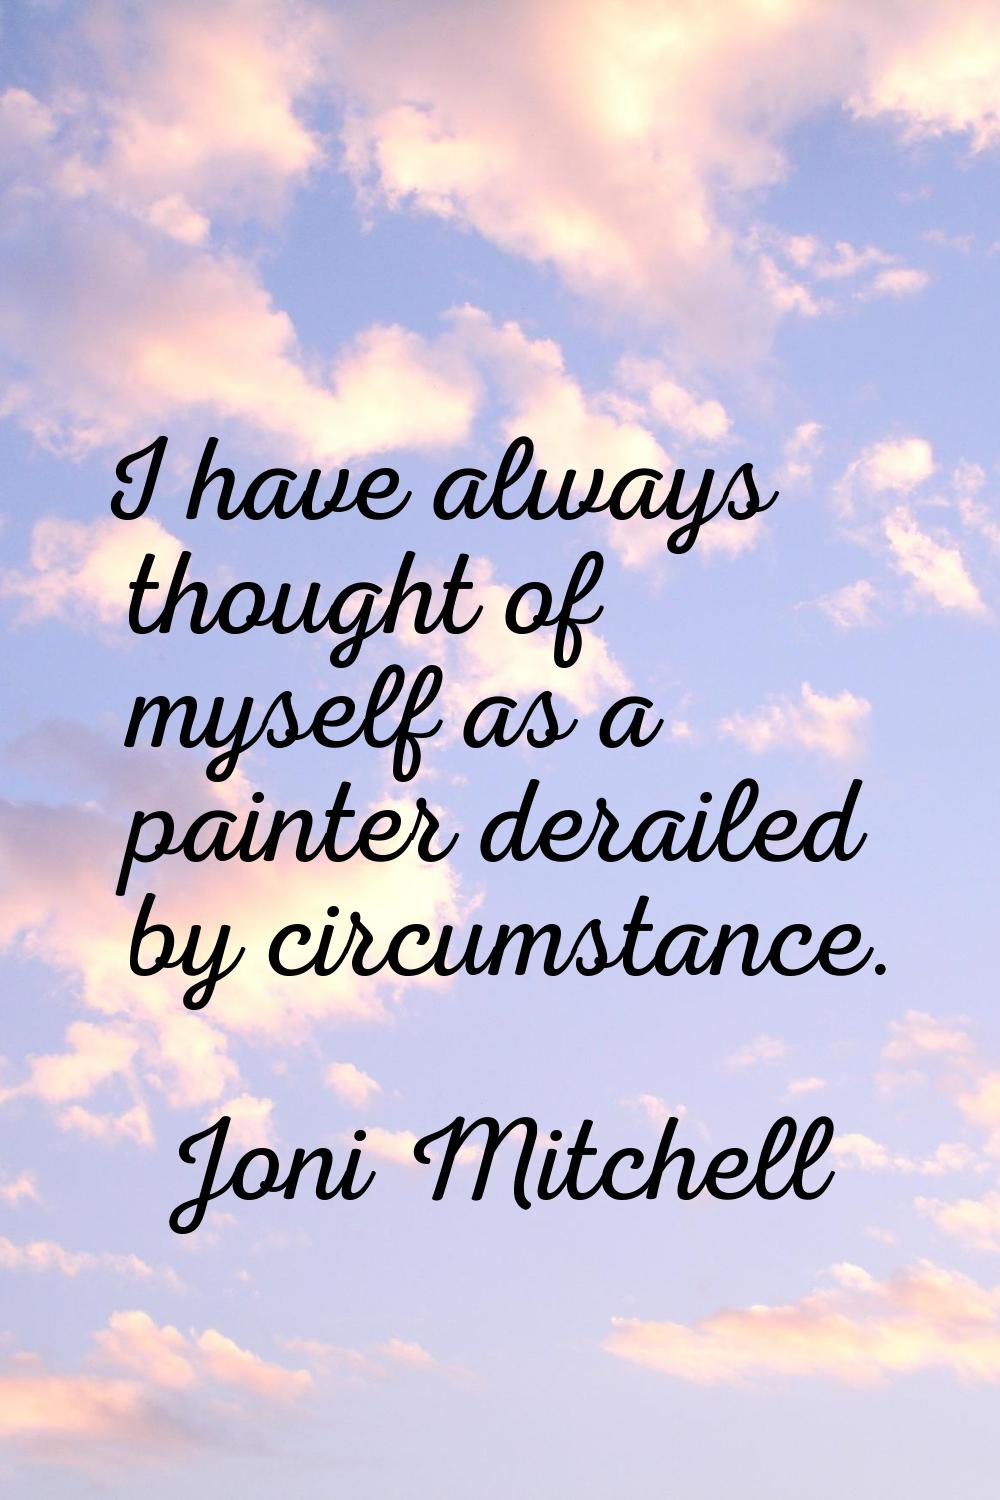 I have always thought of myself as a painter derailed by circumstance.